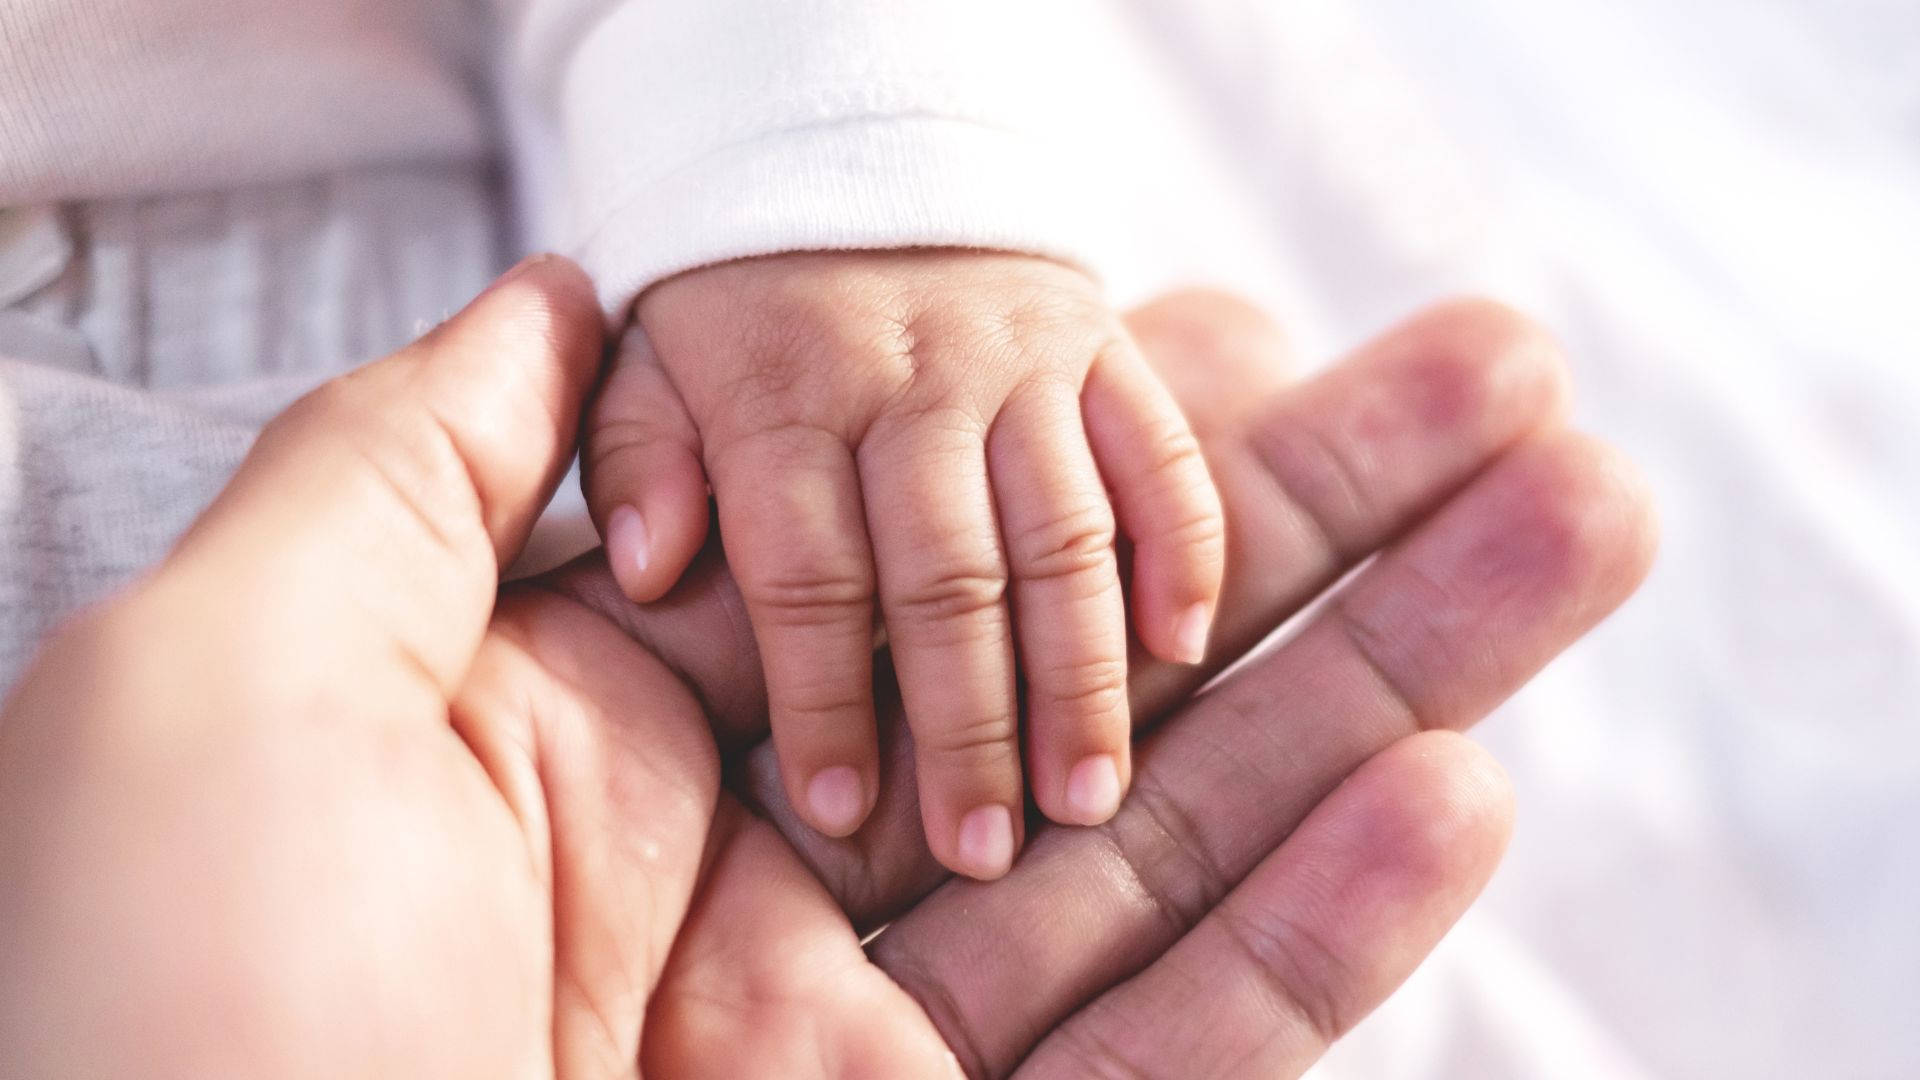 Baby Hand In A Caring Hand Wallpaper